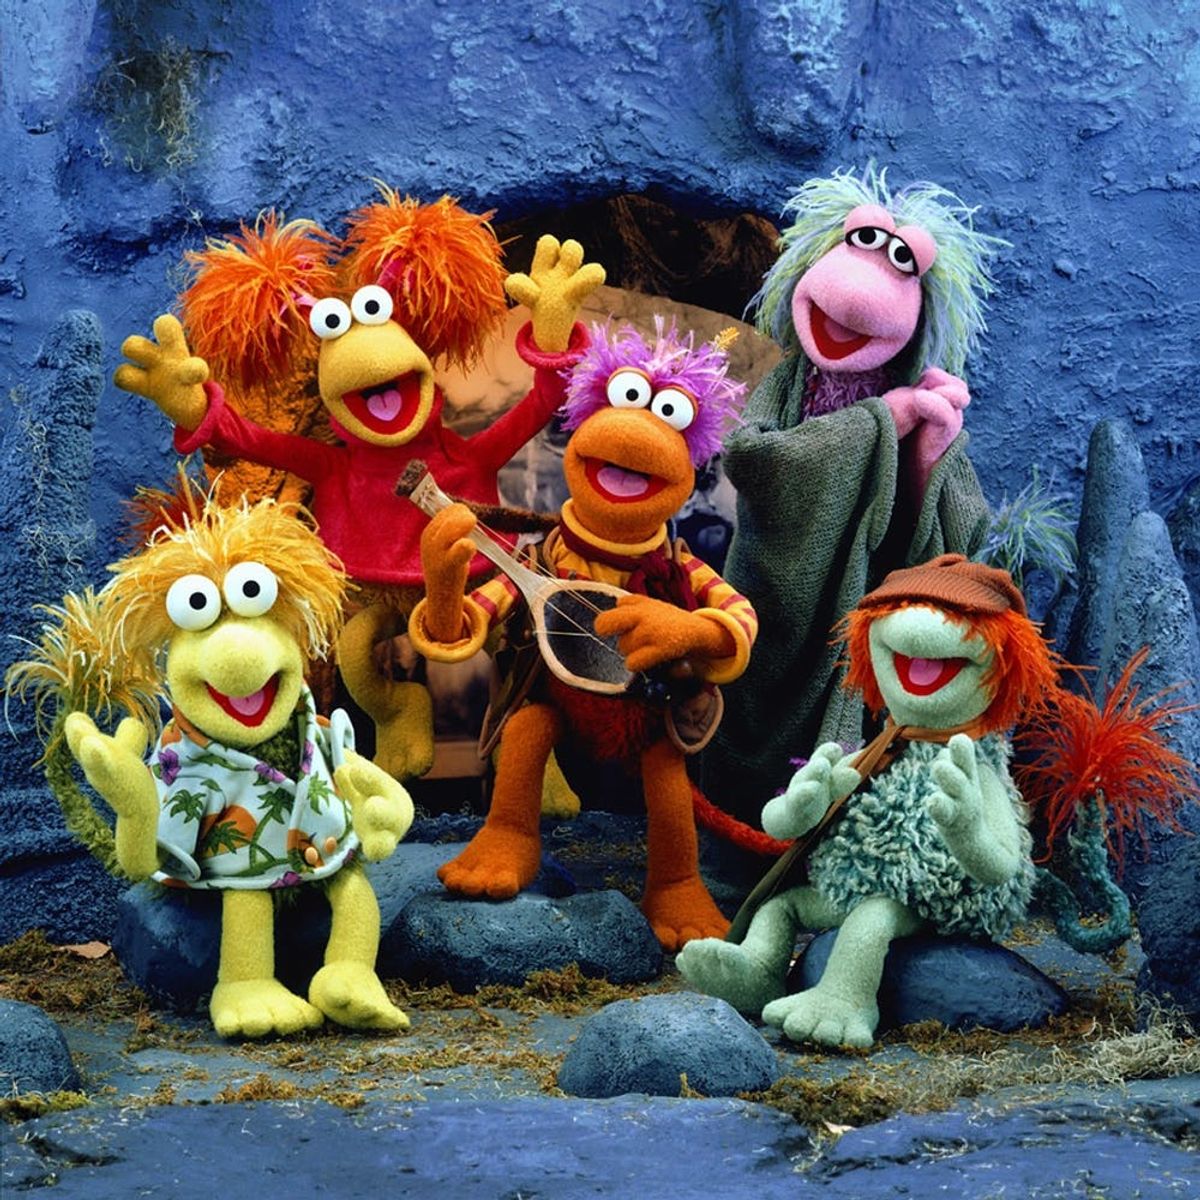 Jim Henson’s Fraggle Rock Is Coming Back to HBO